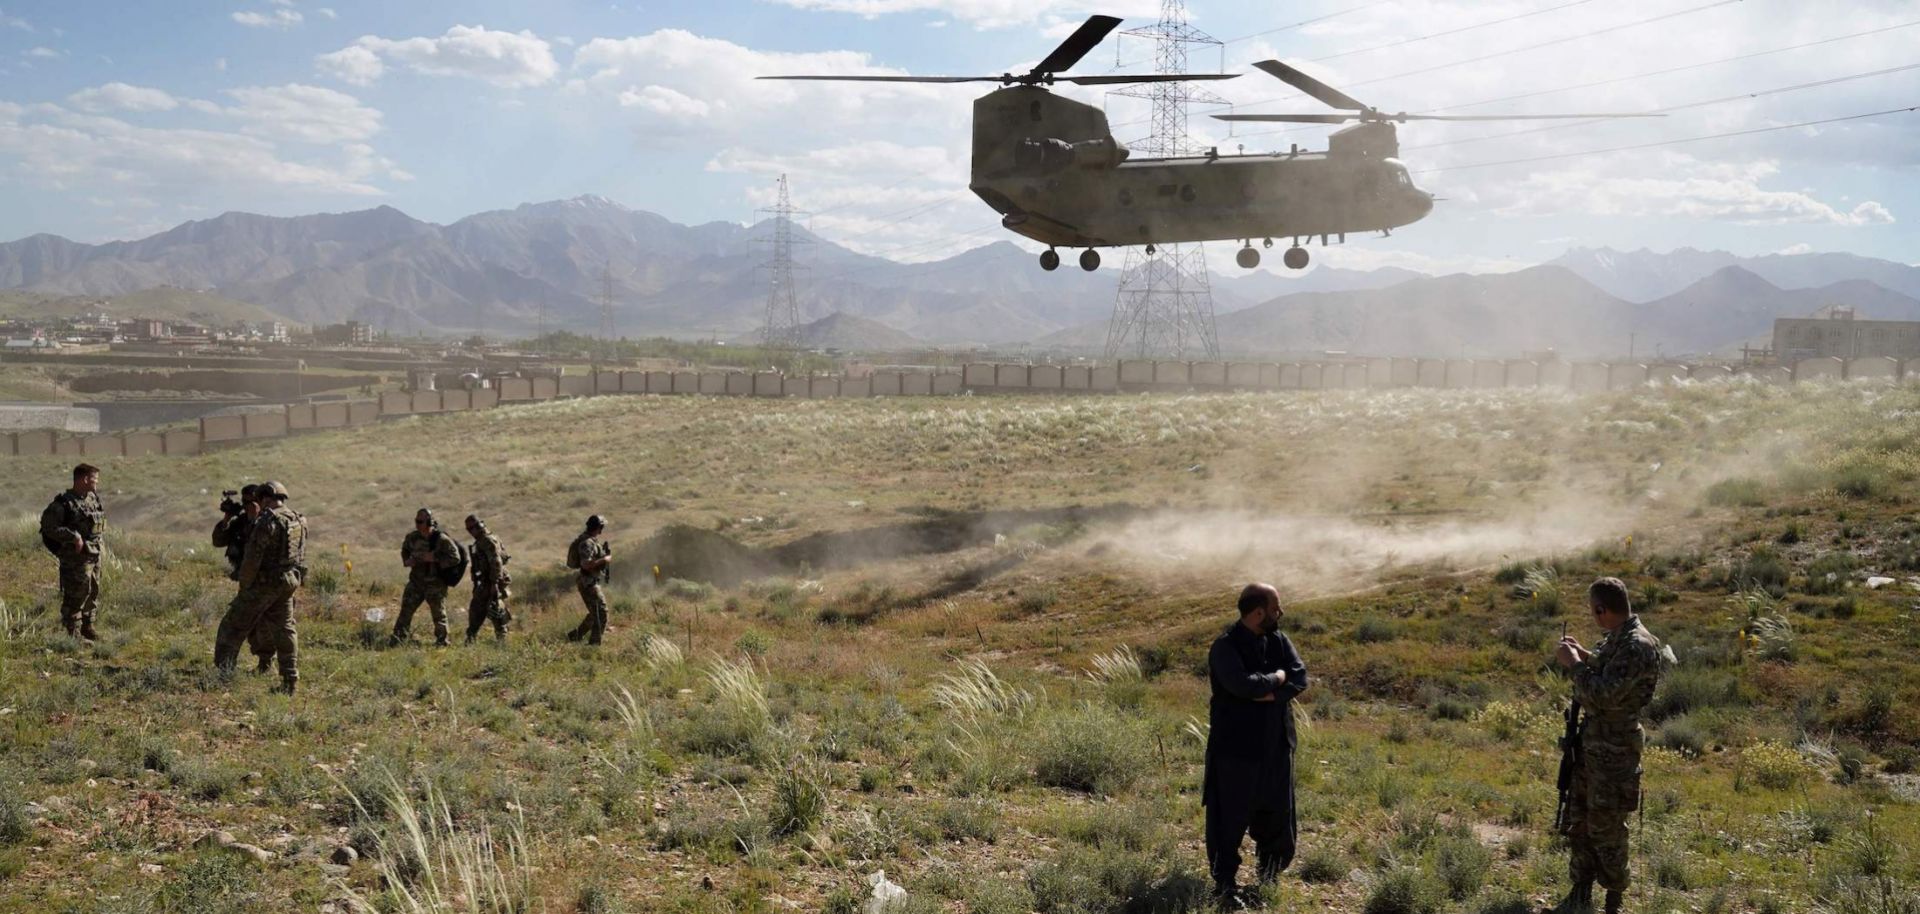 This photo shows a U.S. Chinook helicopter landing at a provincial capital in Afghanistan.